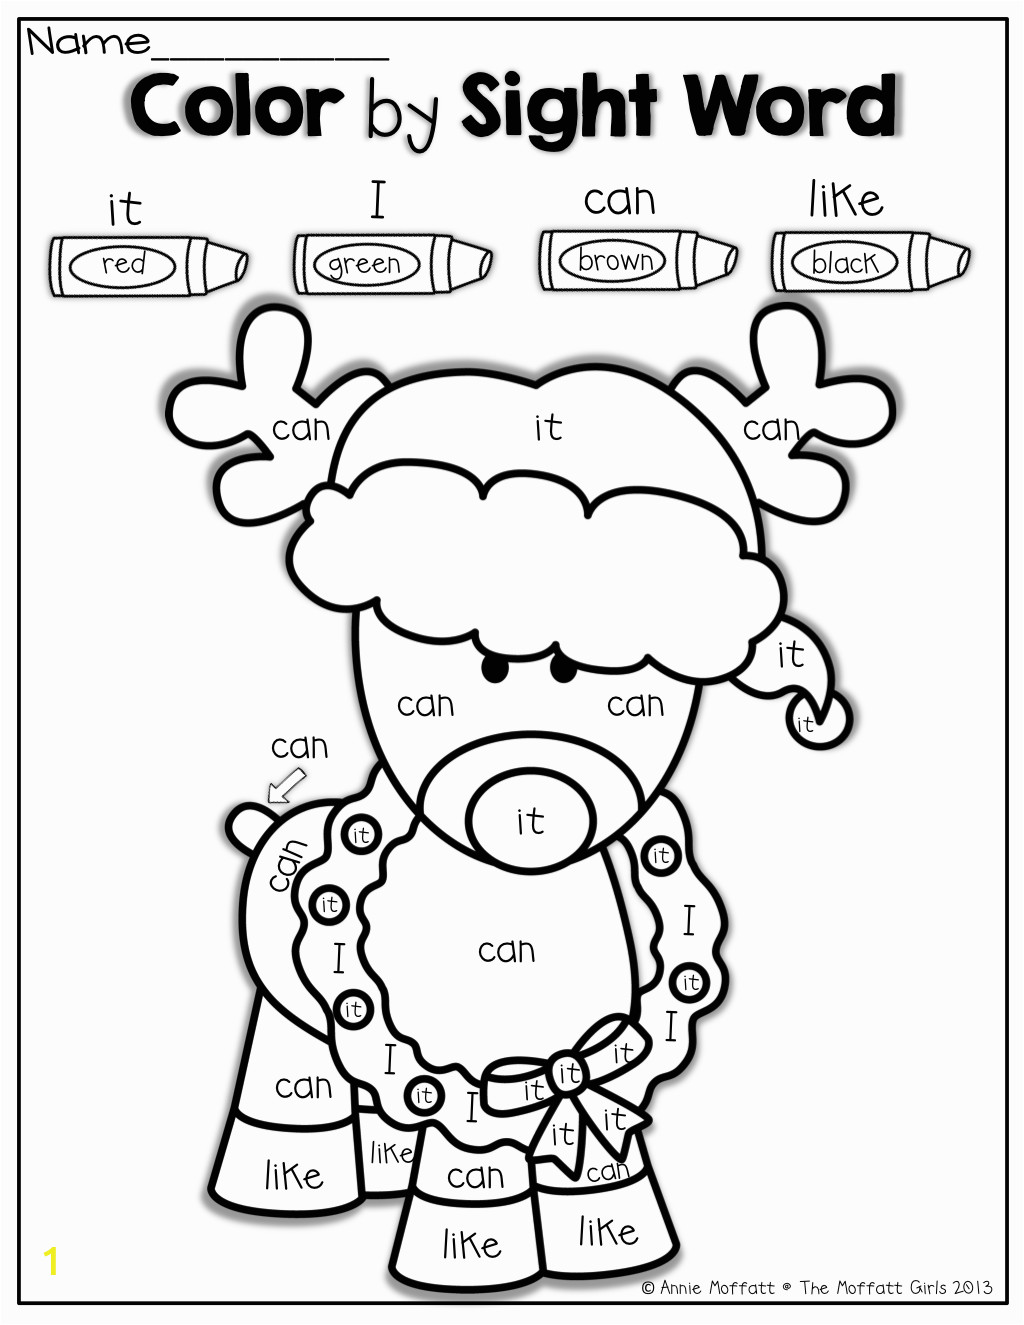 Sight Word Coloring Pages for Kindergarten Color by Sight Word for Christmas